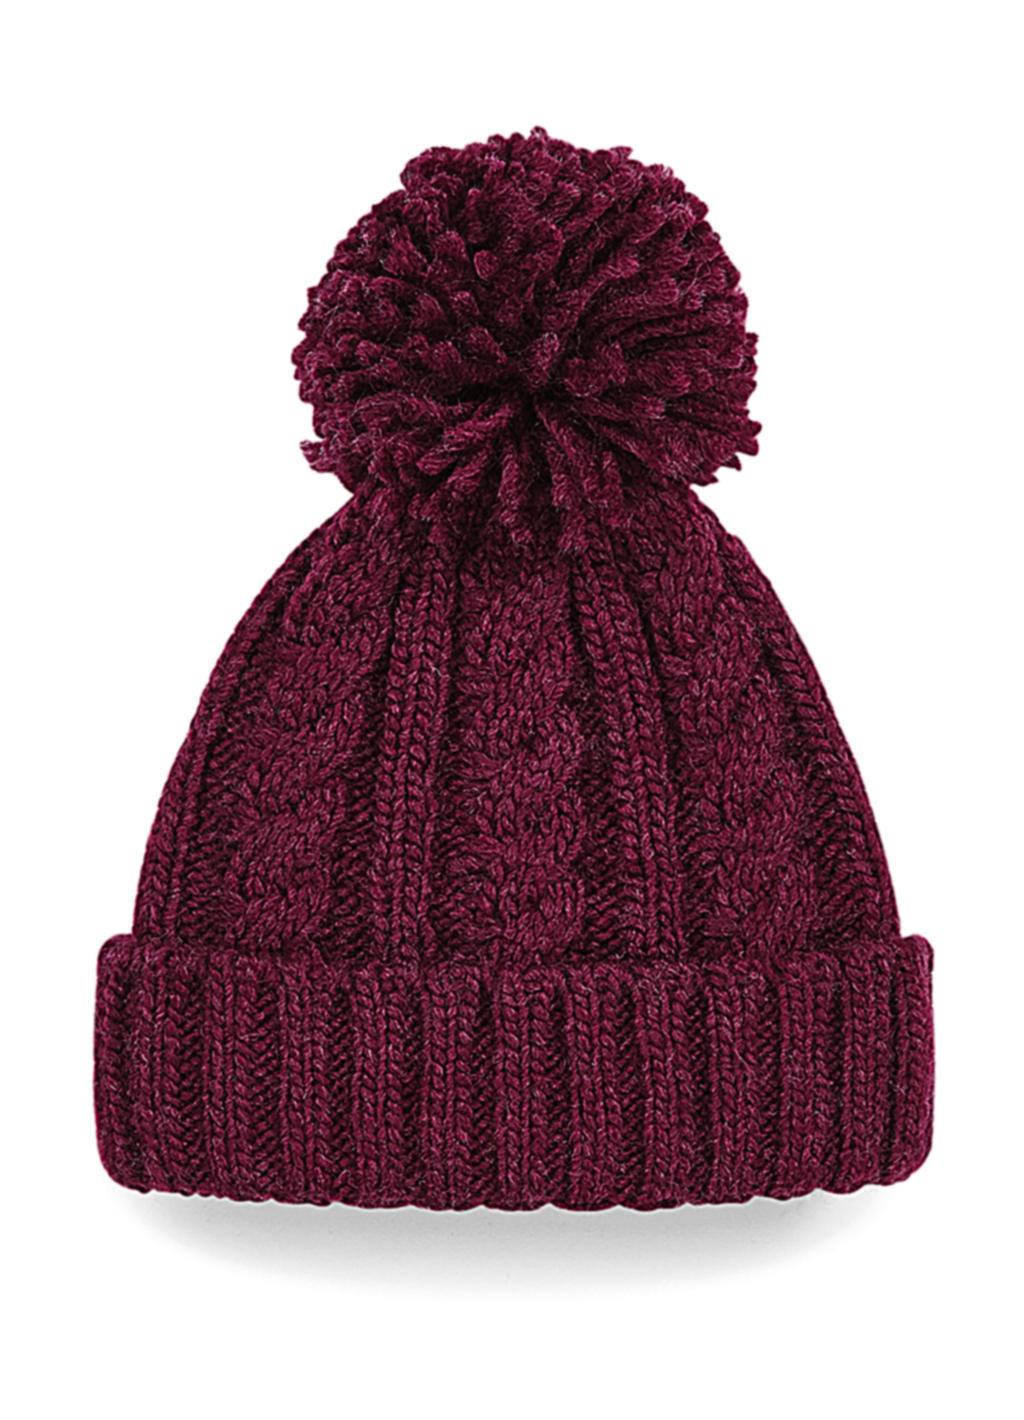  Cable Knit Melange Beanie in Farbe Burgundy